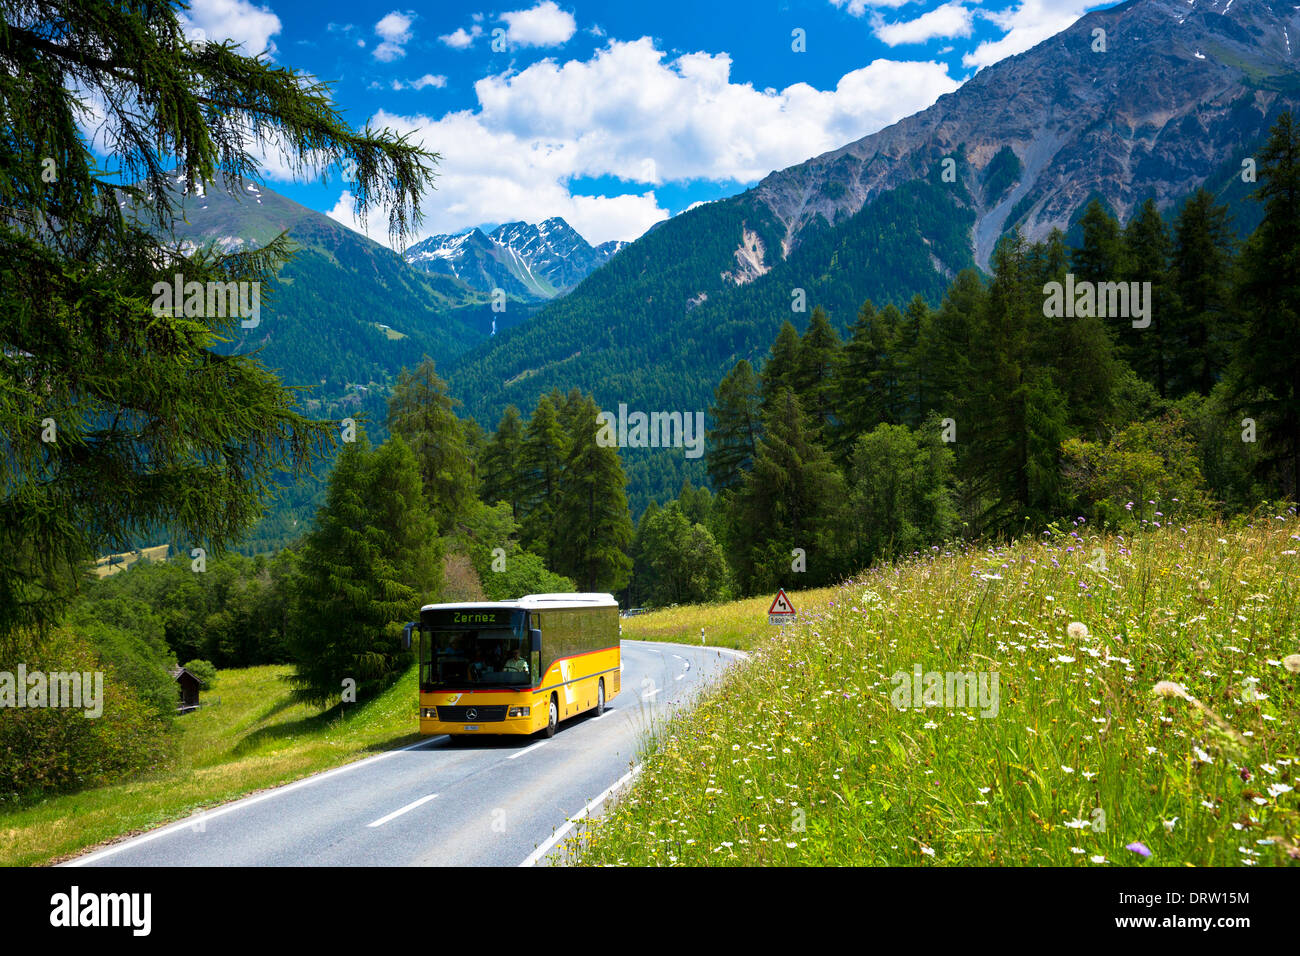 Touring coach on touring holiday in the Swiss Alps, Swiss National Park, Switzerland Stock Photo